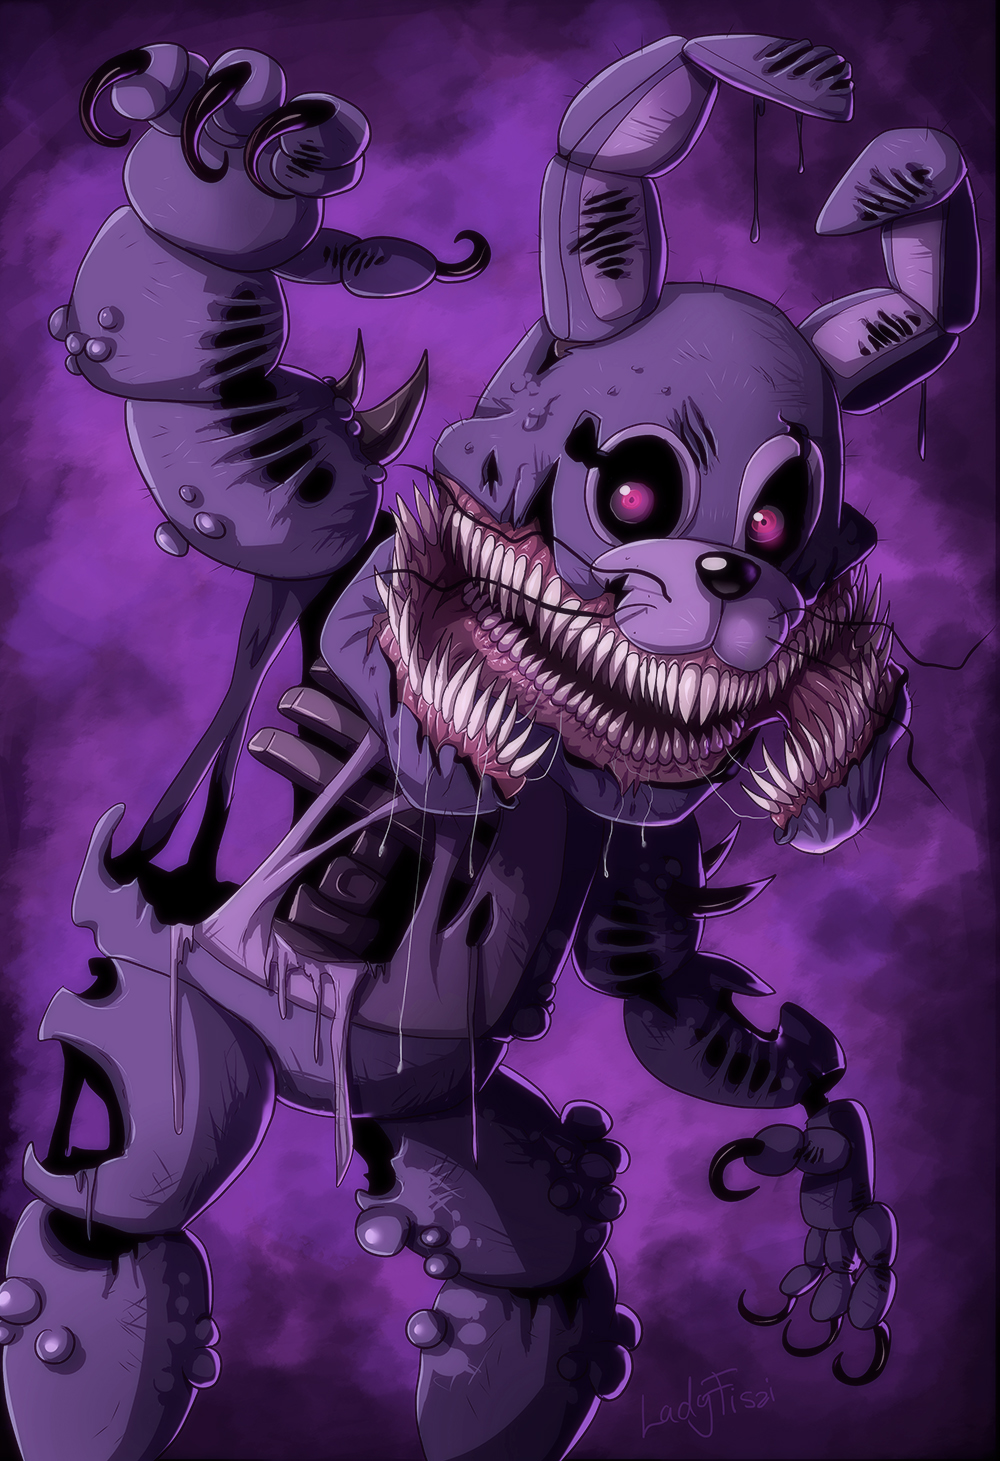 fnaf the twisted ones?